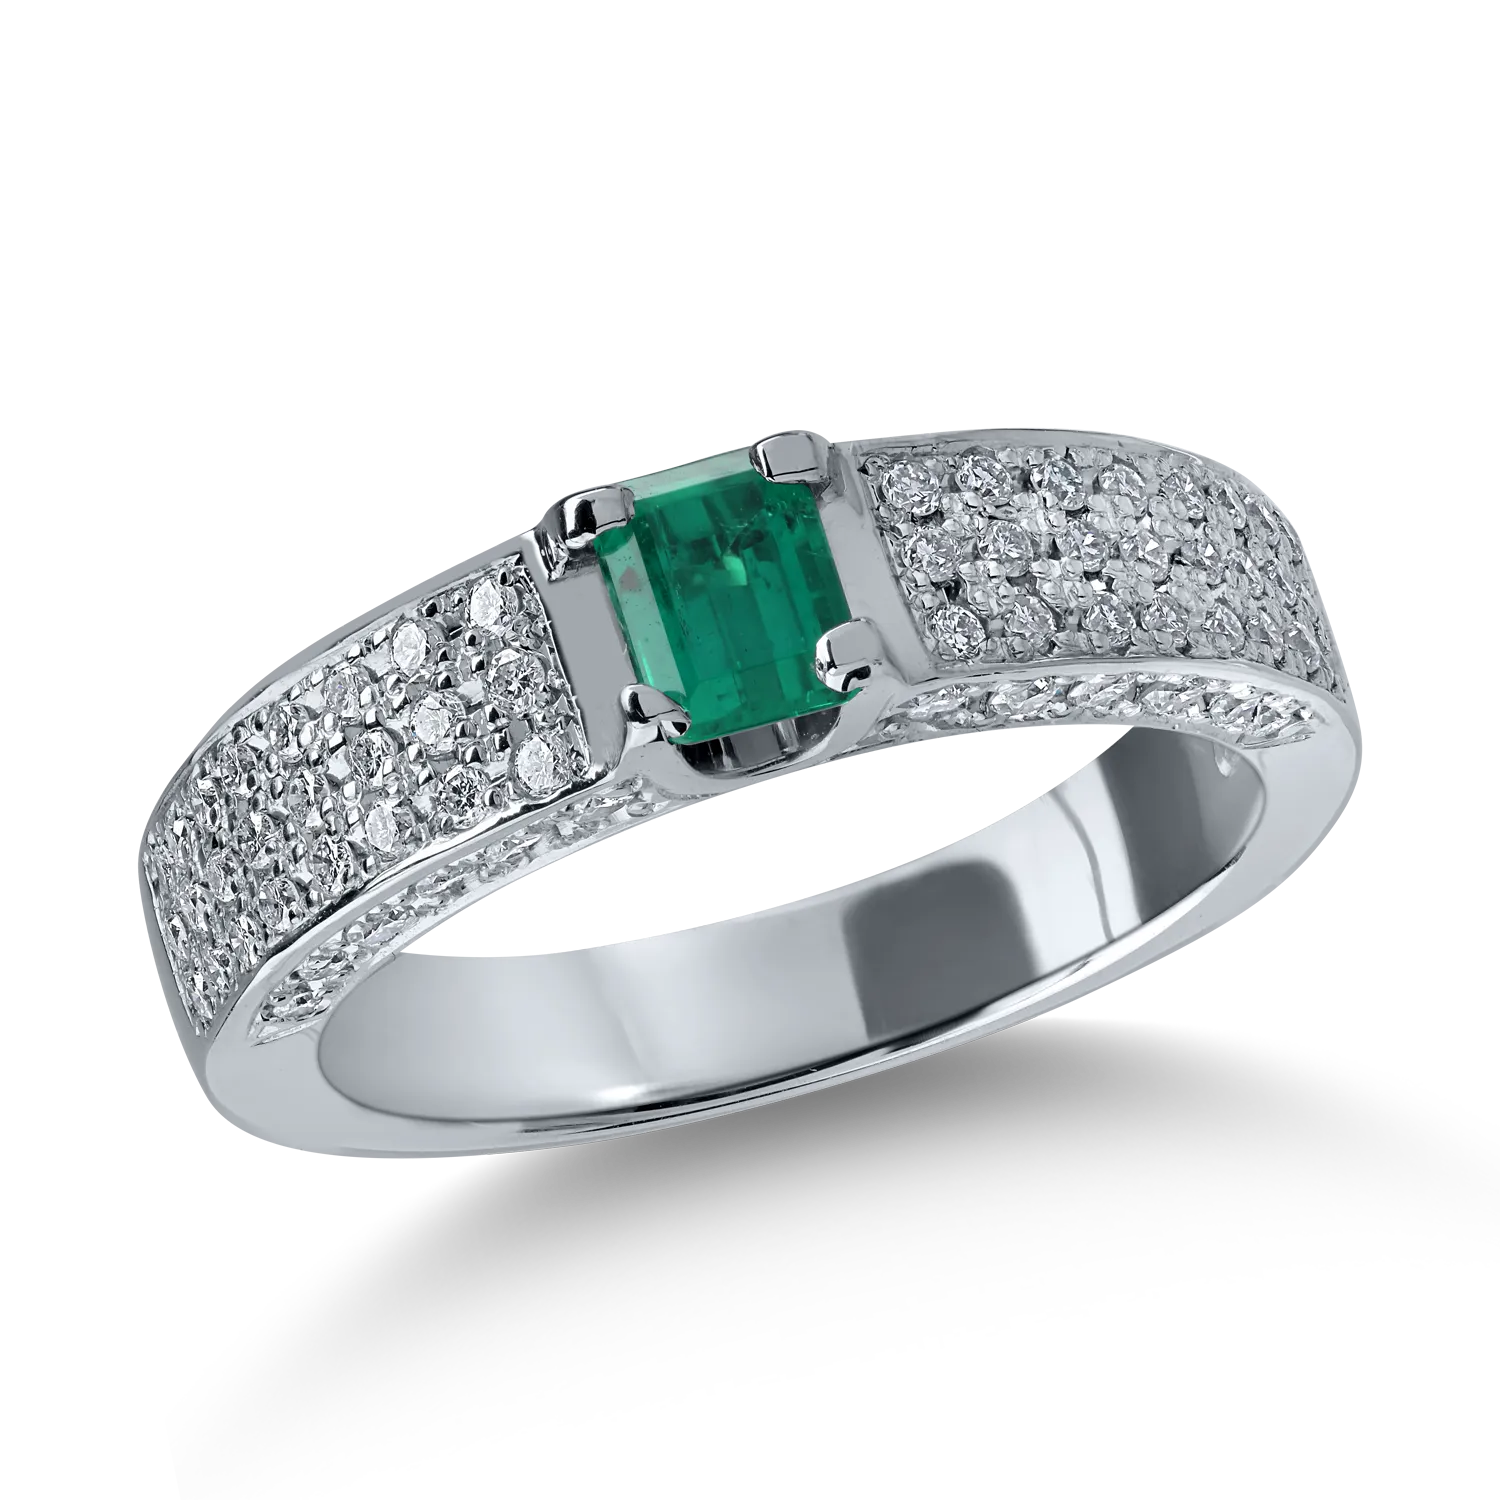 Platinum ring with 0.415ct emerald and 0.51ct diamonds